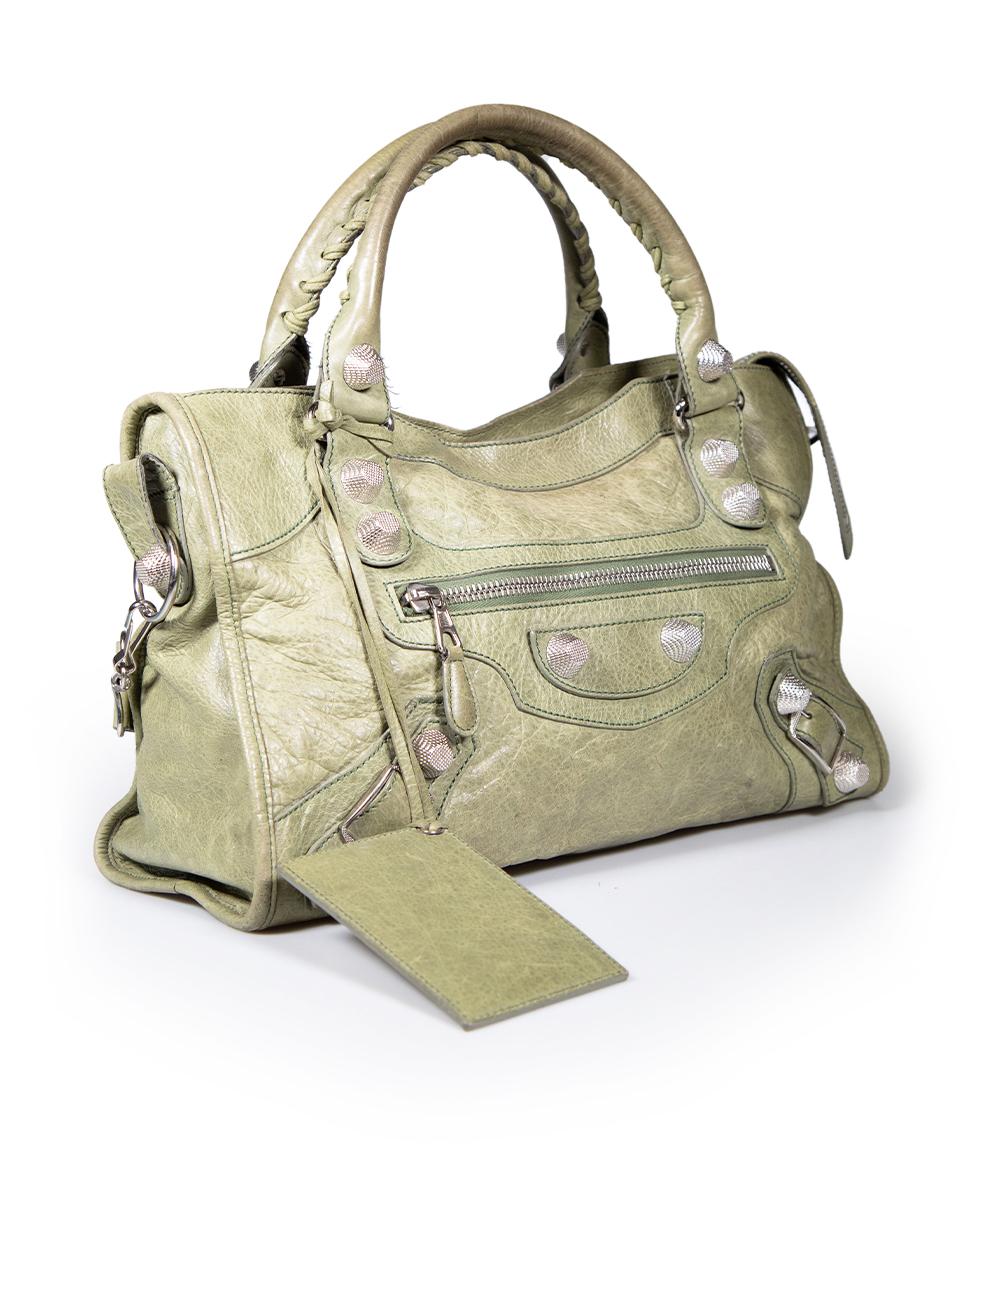 CONDITION is Good. Minor wear to bag is evident. Light wear to the front and the back with abrasions to the leather. The handle trims have also started to fray on this used Balenciaga designer resale item.
 
 
 
 Details
 
 
 Model: City
 
 Green
 
